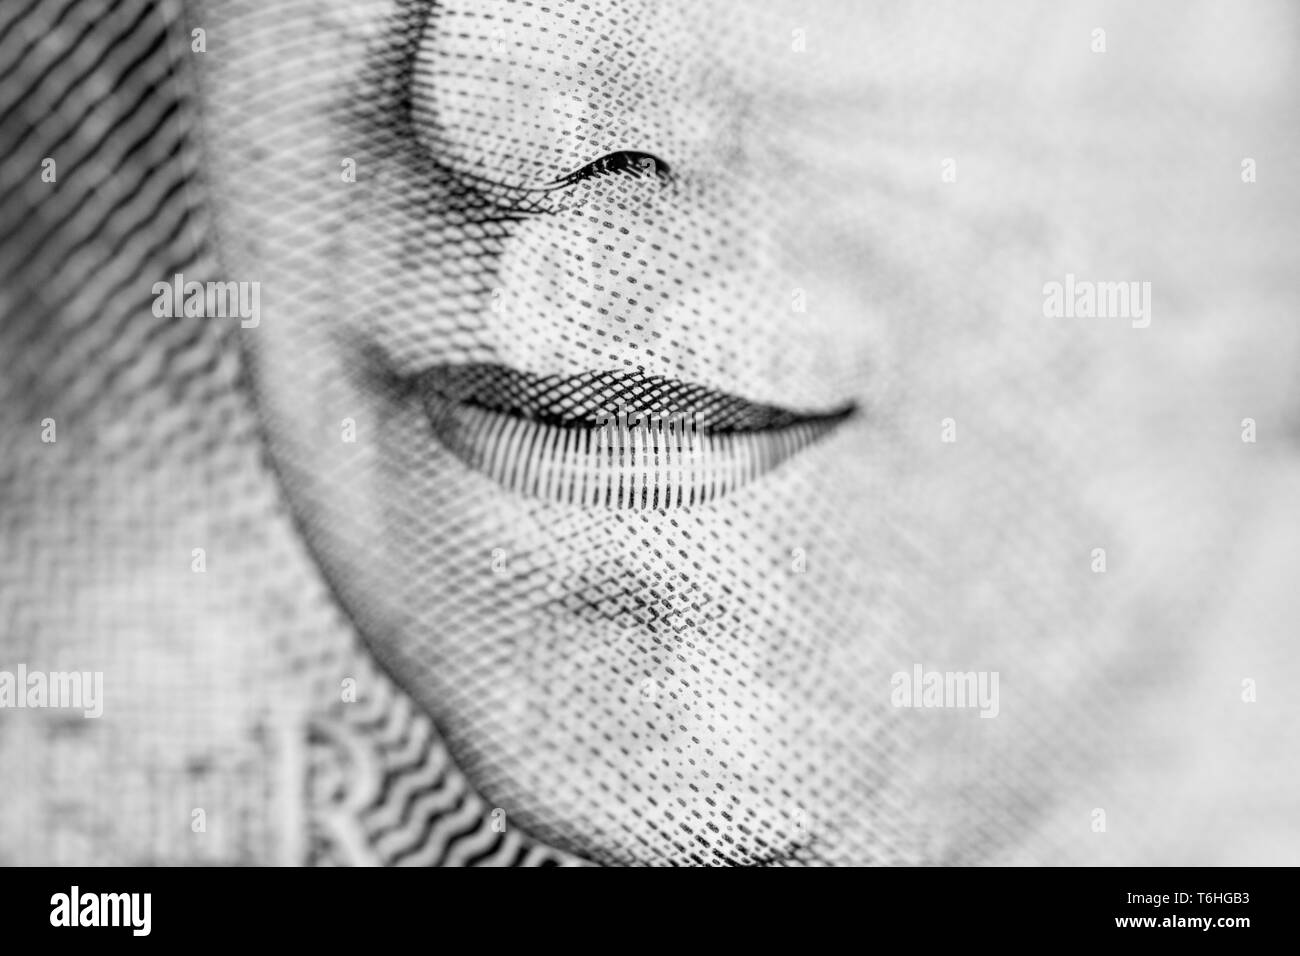 Close-up, macro photo of a piece of £10 banknote. Ten pounds sterling. Portrait of Queen Elizabeth II, mouth. Stock Photo